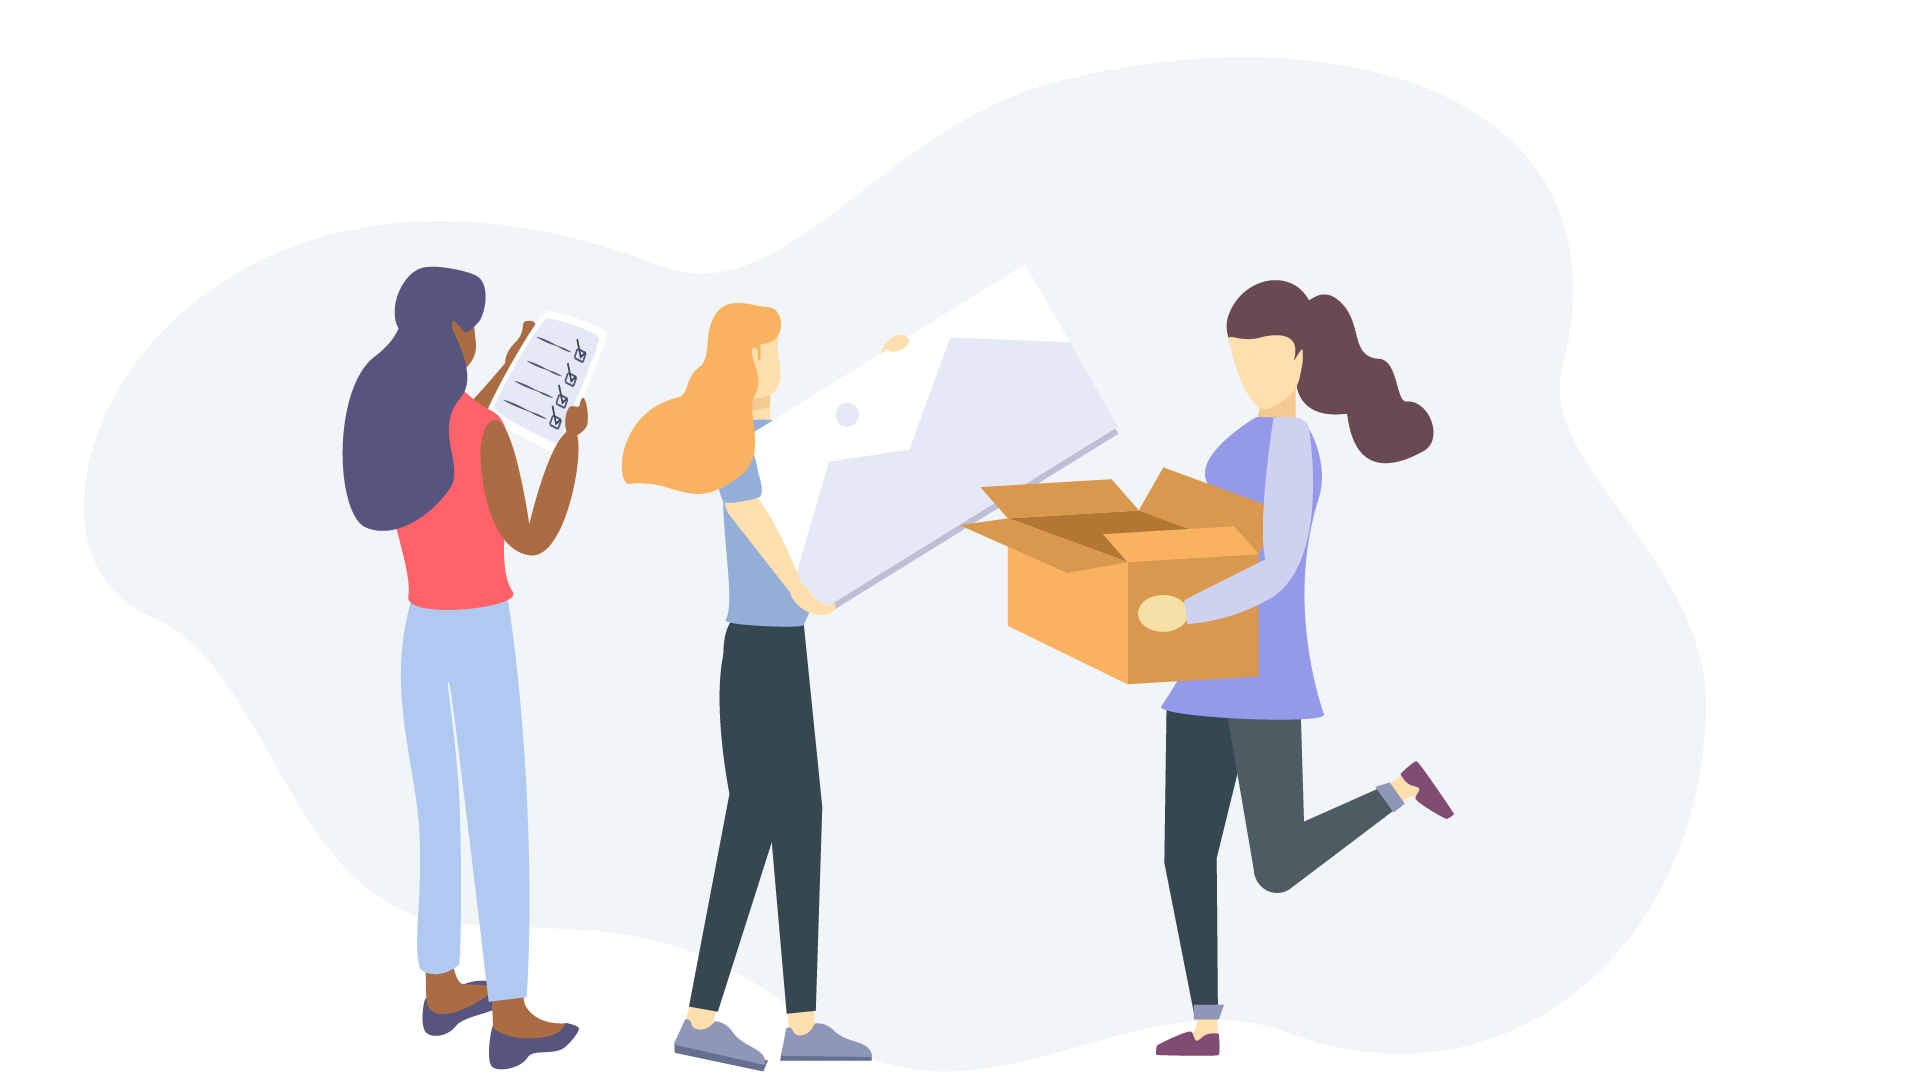 Illustration of three woman, one holding a checklist, the second holding a large canvas, and the third holding a large box.